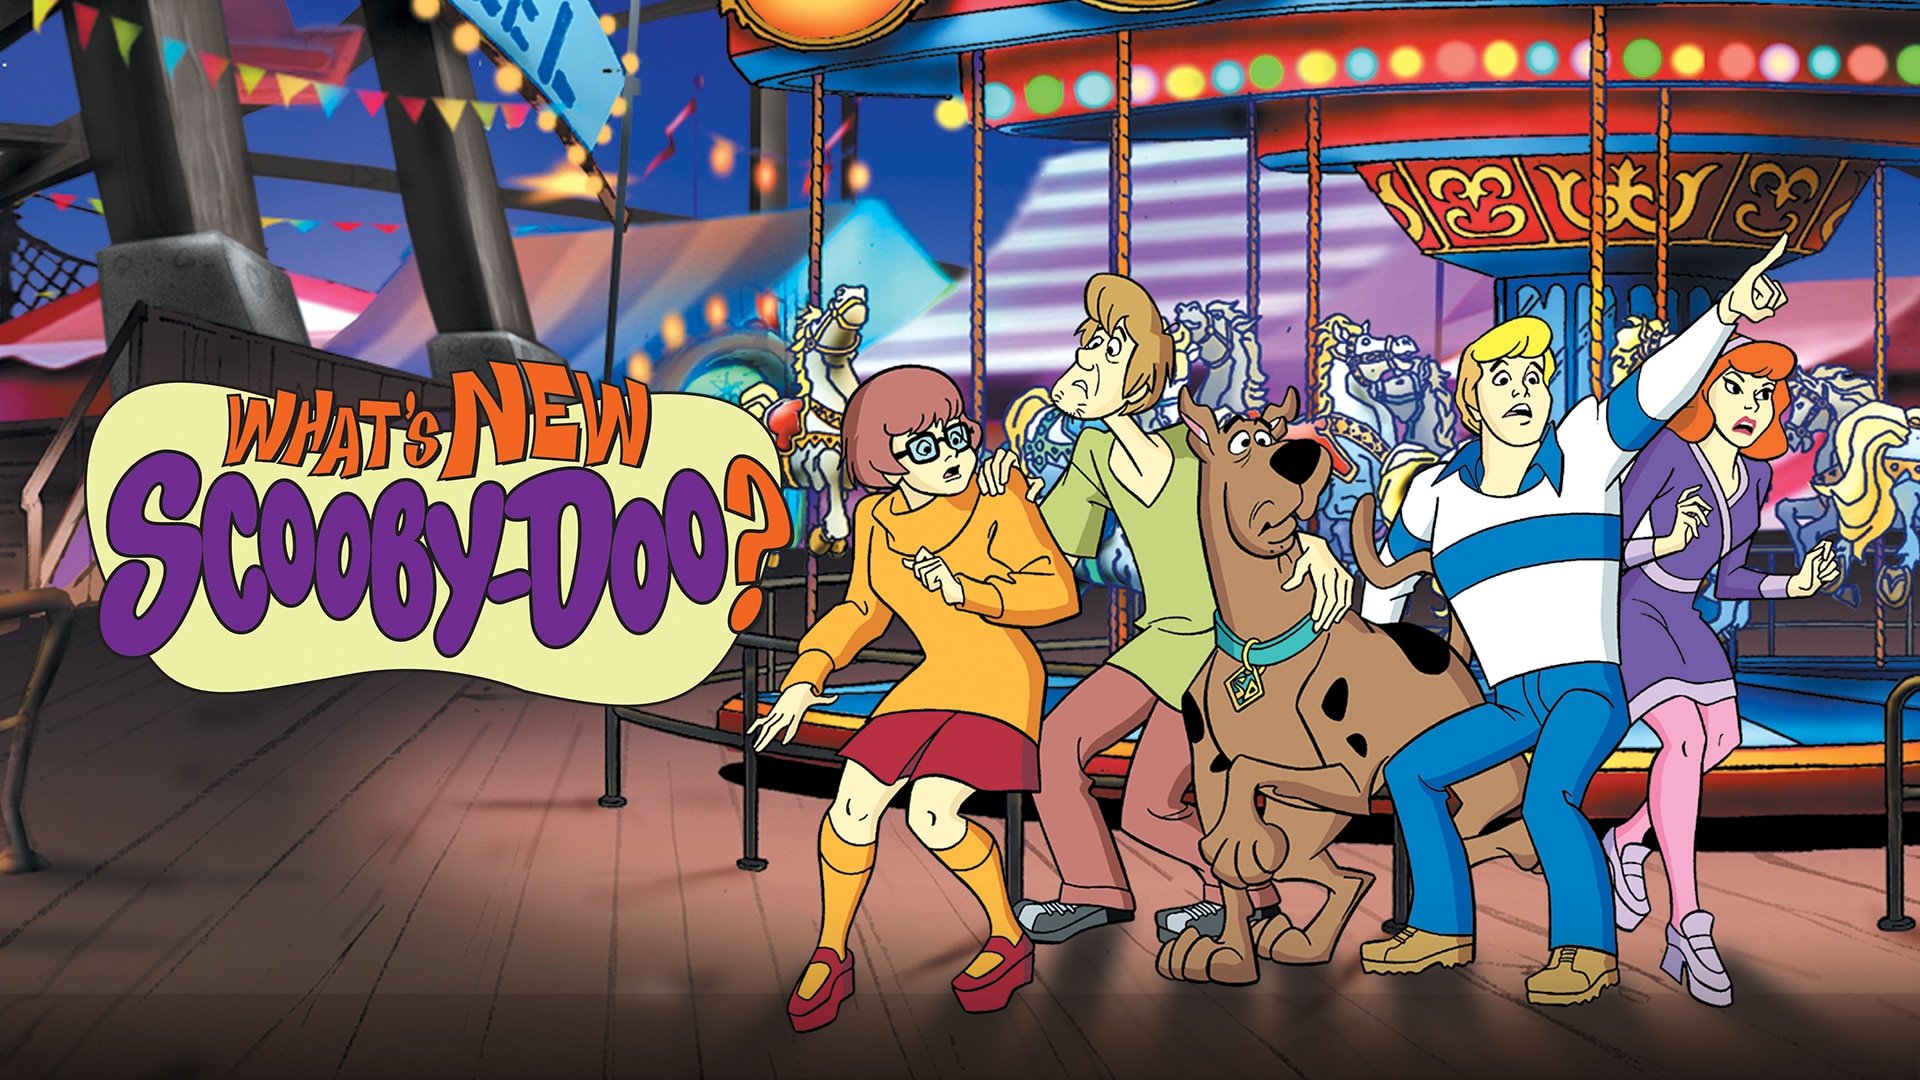 How to Watch Velma: Where Is the New Scooby-Doo Streaming?